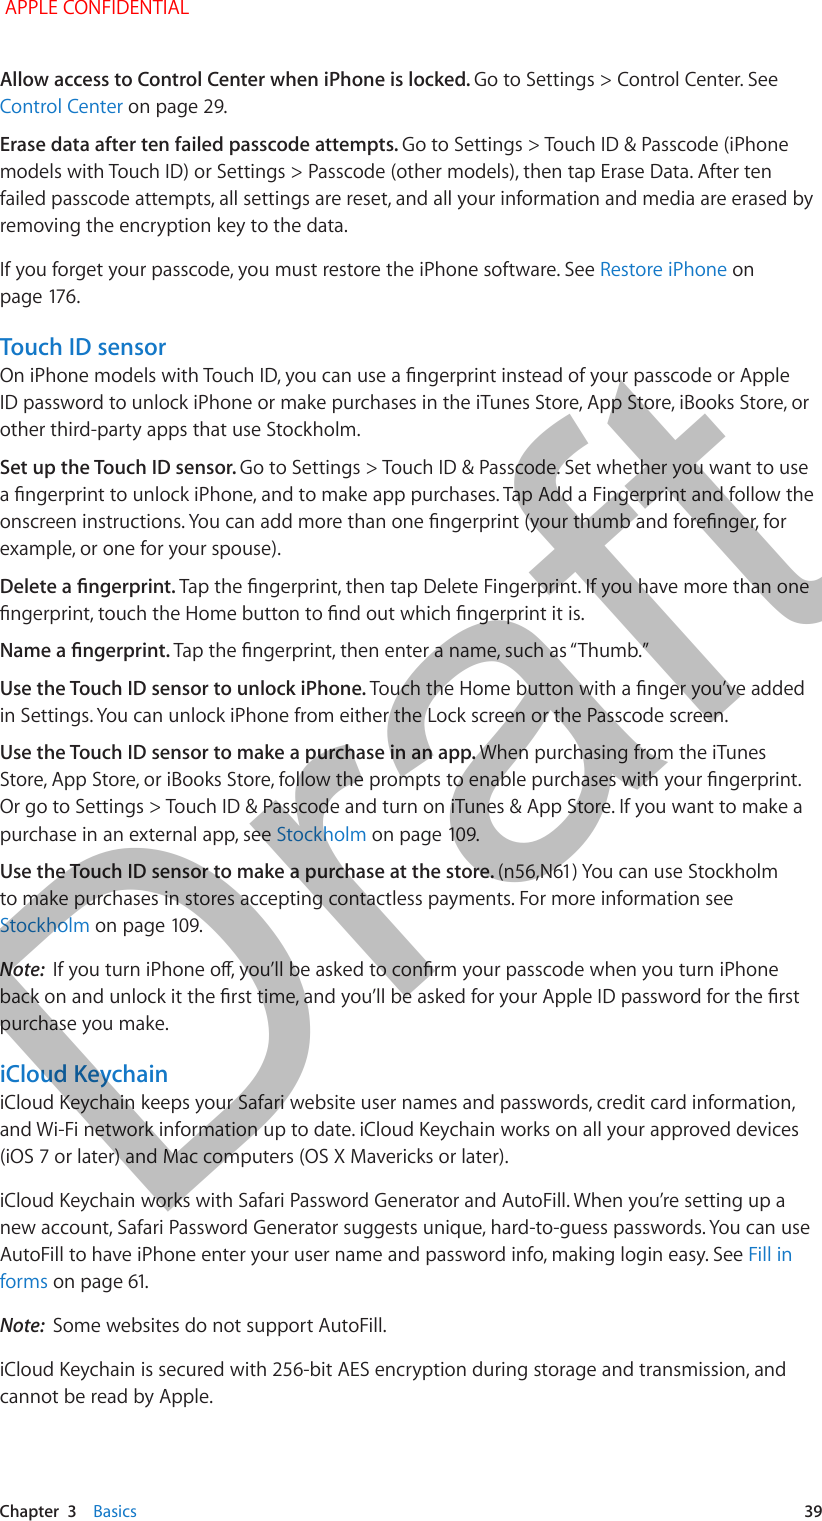   Chapter  3    Basics  39Allow access to Control Center when iPhone is locked. Go to Settings &gt; Control Center. See Control Center on page 29.Erase data after ten failed passcode attempts. Go to Settings &gt; Touch ID &amp; Passcode (iPhone models with Touch ID) or Settings &gt; Passcode (other models), then tap Erase Data. After ten failed passcode attempts, all settings are reset, and all your information and media are erased by removing the encryption key to the data.If you forget your passcode, you must restore the iPhone software. See Restore iPhone on page 176.Touch ID sensorOn iPhone models with Touch ID, you can use a ngerprint instead of your passcode or Apple ID password to unlock iPhone or make purchases in the iTunes Store, App Store, iBooks Store, or other third-party apps that use Stockholm. Set up the Touch ID sensor. Go to Settings &gt; Touch ID &amp; Passcode. Set whether you want to use a ngerprint to unlock iPhone, and to make app purchases. Tap Add a Fingerprint and follow the onscreen instructions. You can add more than one ngerprint (your thumb and forenger, for example, or one for your spouse). Delete a ngerprint. Tap the ngerprint, then tap Delete Fingerprint. If you have more than one ngerprint, touch the Home button to nd out which ngerprint it is.Name a ngerprint. Tap the ngerprint, then enter a name, such as “Thumb.”Use the Touch ID sensor to unlock iPhone. Touch the Home button with a nger you’ve added in Settings. You can unlock iPhone from either the Lock screen or the Passcode screen.Use the Touch ID sensor to make a purchase in an app. When purchasing from the iTunes Store, App Store, or iBooks Store, follow the prompts to enable purchases with your ngerprint. Or go to Settings &gt; Touch ID &amp; Passcode and turn on iTunes &amp; App Store. If you want to make a purchase in an external app, see Stockholm on page 109.Use the Touch ID sensor to make a purchase at the store. (n56,N61) You can use Stockholm to make purchases in stores accepting contactless payments. For more information see Stockholm on page 109.Note:  If you turn iPhone o, you’ll be asked to conrm your passcode when you turn iPhone back on and unlock it the rst time, and you’ll be asked for your Apple ID password for the rst purchase you make.iCloud KeychainiCloud Keychain keeps your Safari website user names and passwords, credit card information, and Wi-Fi network information up to date. iCloud Keychain works on all your approved devices (iOS 7 or later) and Mac computers (OS X Mavericks or later).iCloud Keychain works with Safari Password Generator and AutoFill. When you’re setting up a new account, Safari Password Generator suggests unique, hard-to-guess passwords. You can use AutoFill to have iPhone enter your user name and password info, making login easy. See Fill in forms on page 61.Note:  Some websites do not support AutoFill.iCloud Keychain is secured with 256-bit AES encryption during storage and transmission, and cannot be read by Apple. APPLE CONFIDENTIALDraft